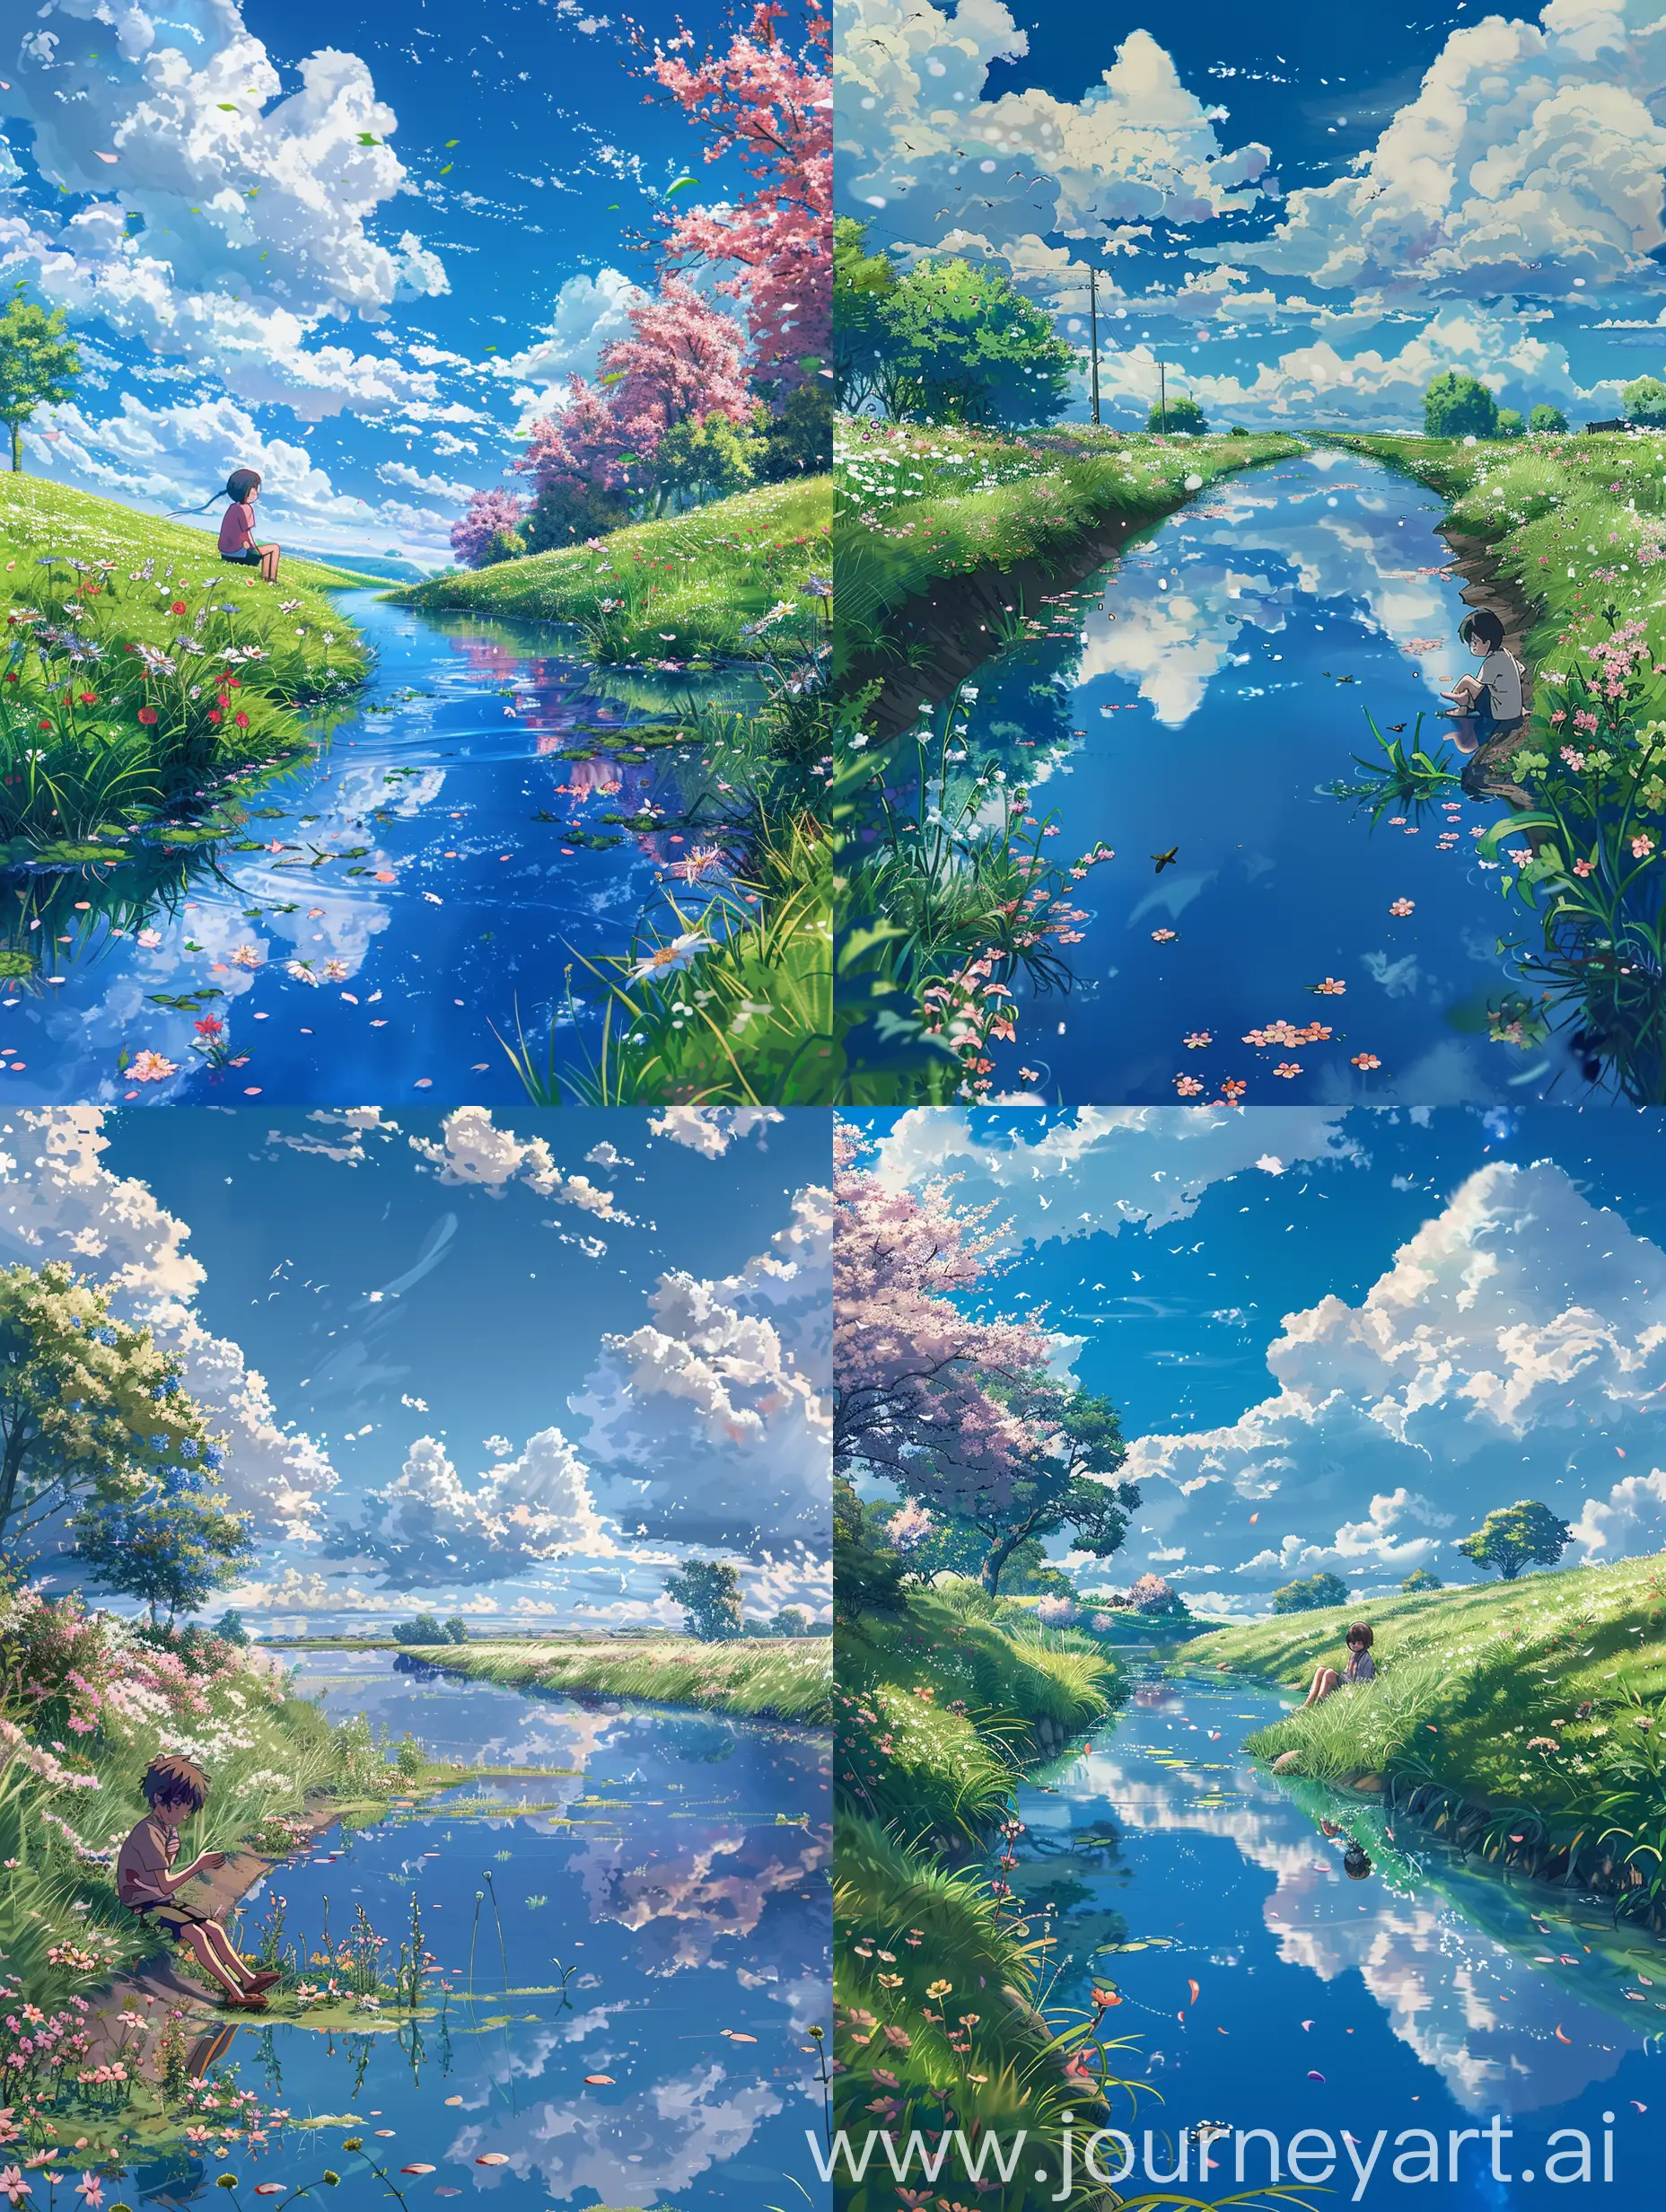 beautiful anime scenery,High depth of makato shinkai style,in the beautiful summers.beautiful blossoms with some flowers and grass,a little windy,a very small river like system in the left side reflecting the beautiful sky,fluffy clouds,blue sky,there are some beautiful trees,a relaxed tone view,a kid sitting and enjoying the environment near the small river,avoid a bad and distorted view of the kid,avoid missing fingers,avoid bad body view, (make the scene a relaxed afternoon).